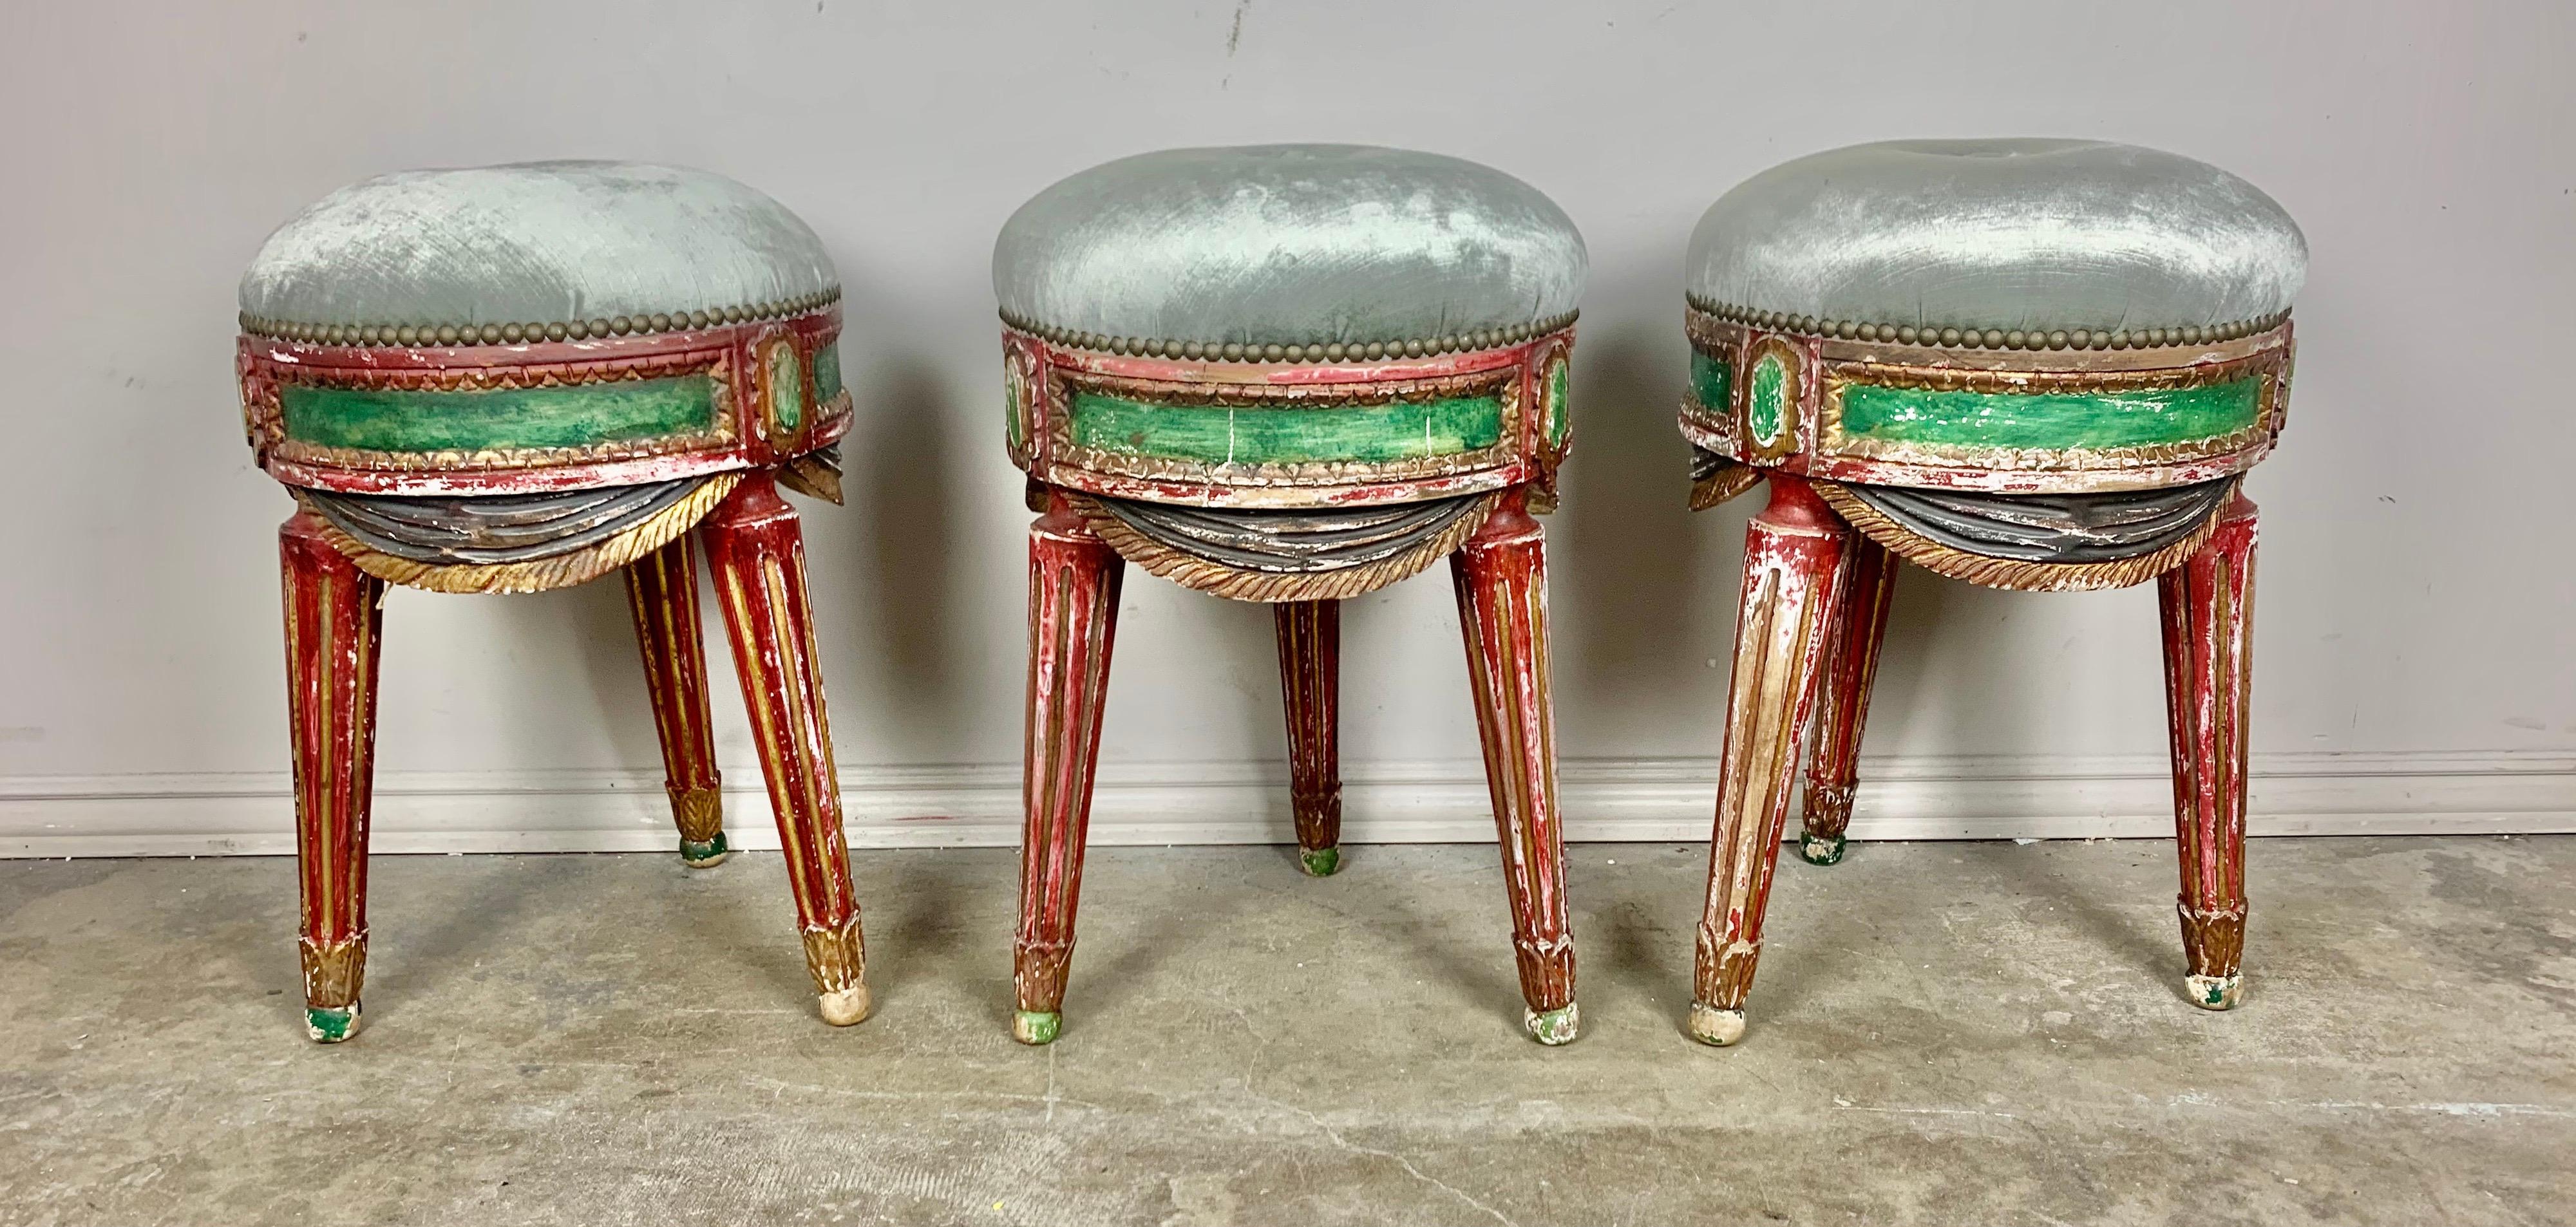 Set of three carved wood painted tripod stools standing on three fluted legs with celadon velvet upholstery. The benches are painted in vibrant colors of red, green & blue. The upholstery is finished with nailhead trim detail. Great carved details